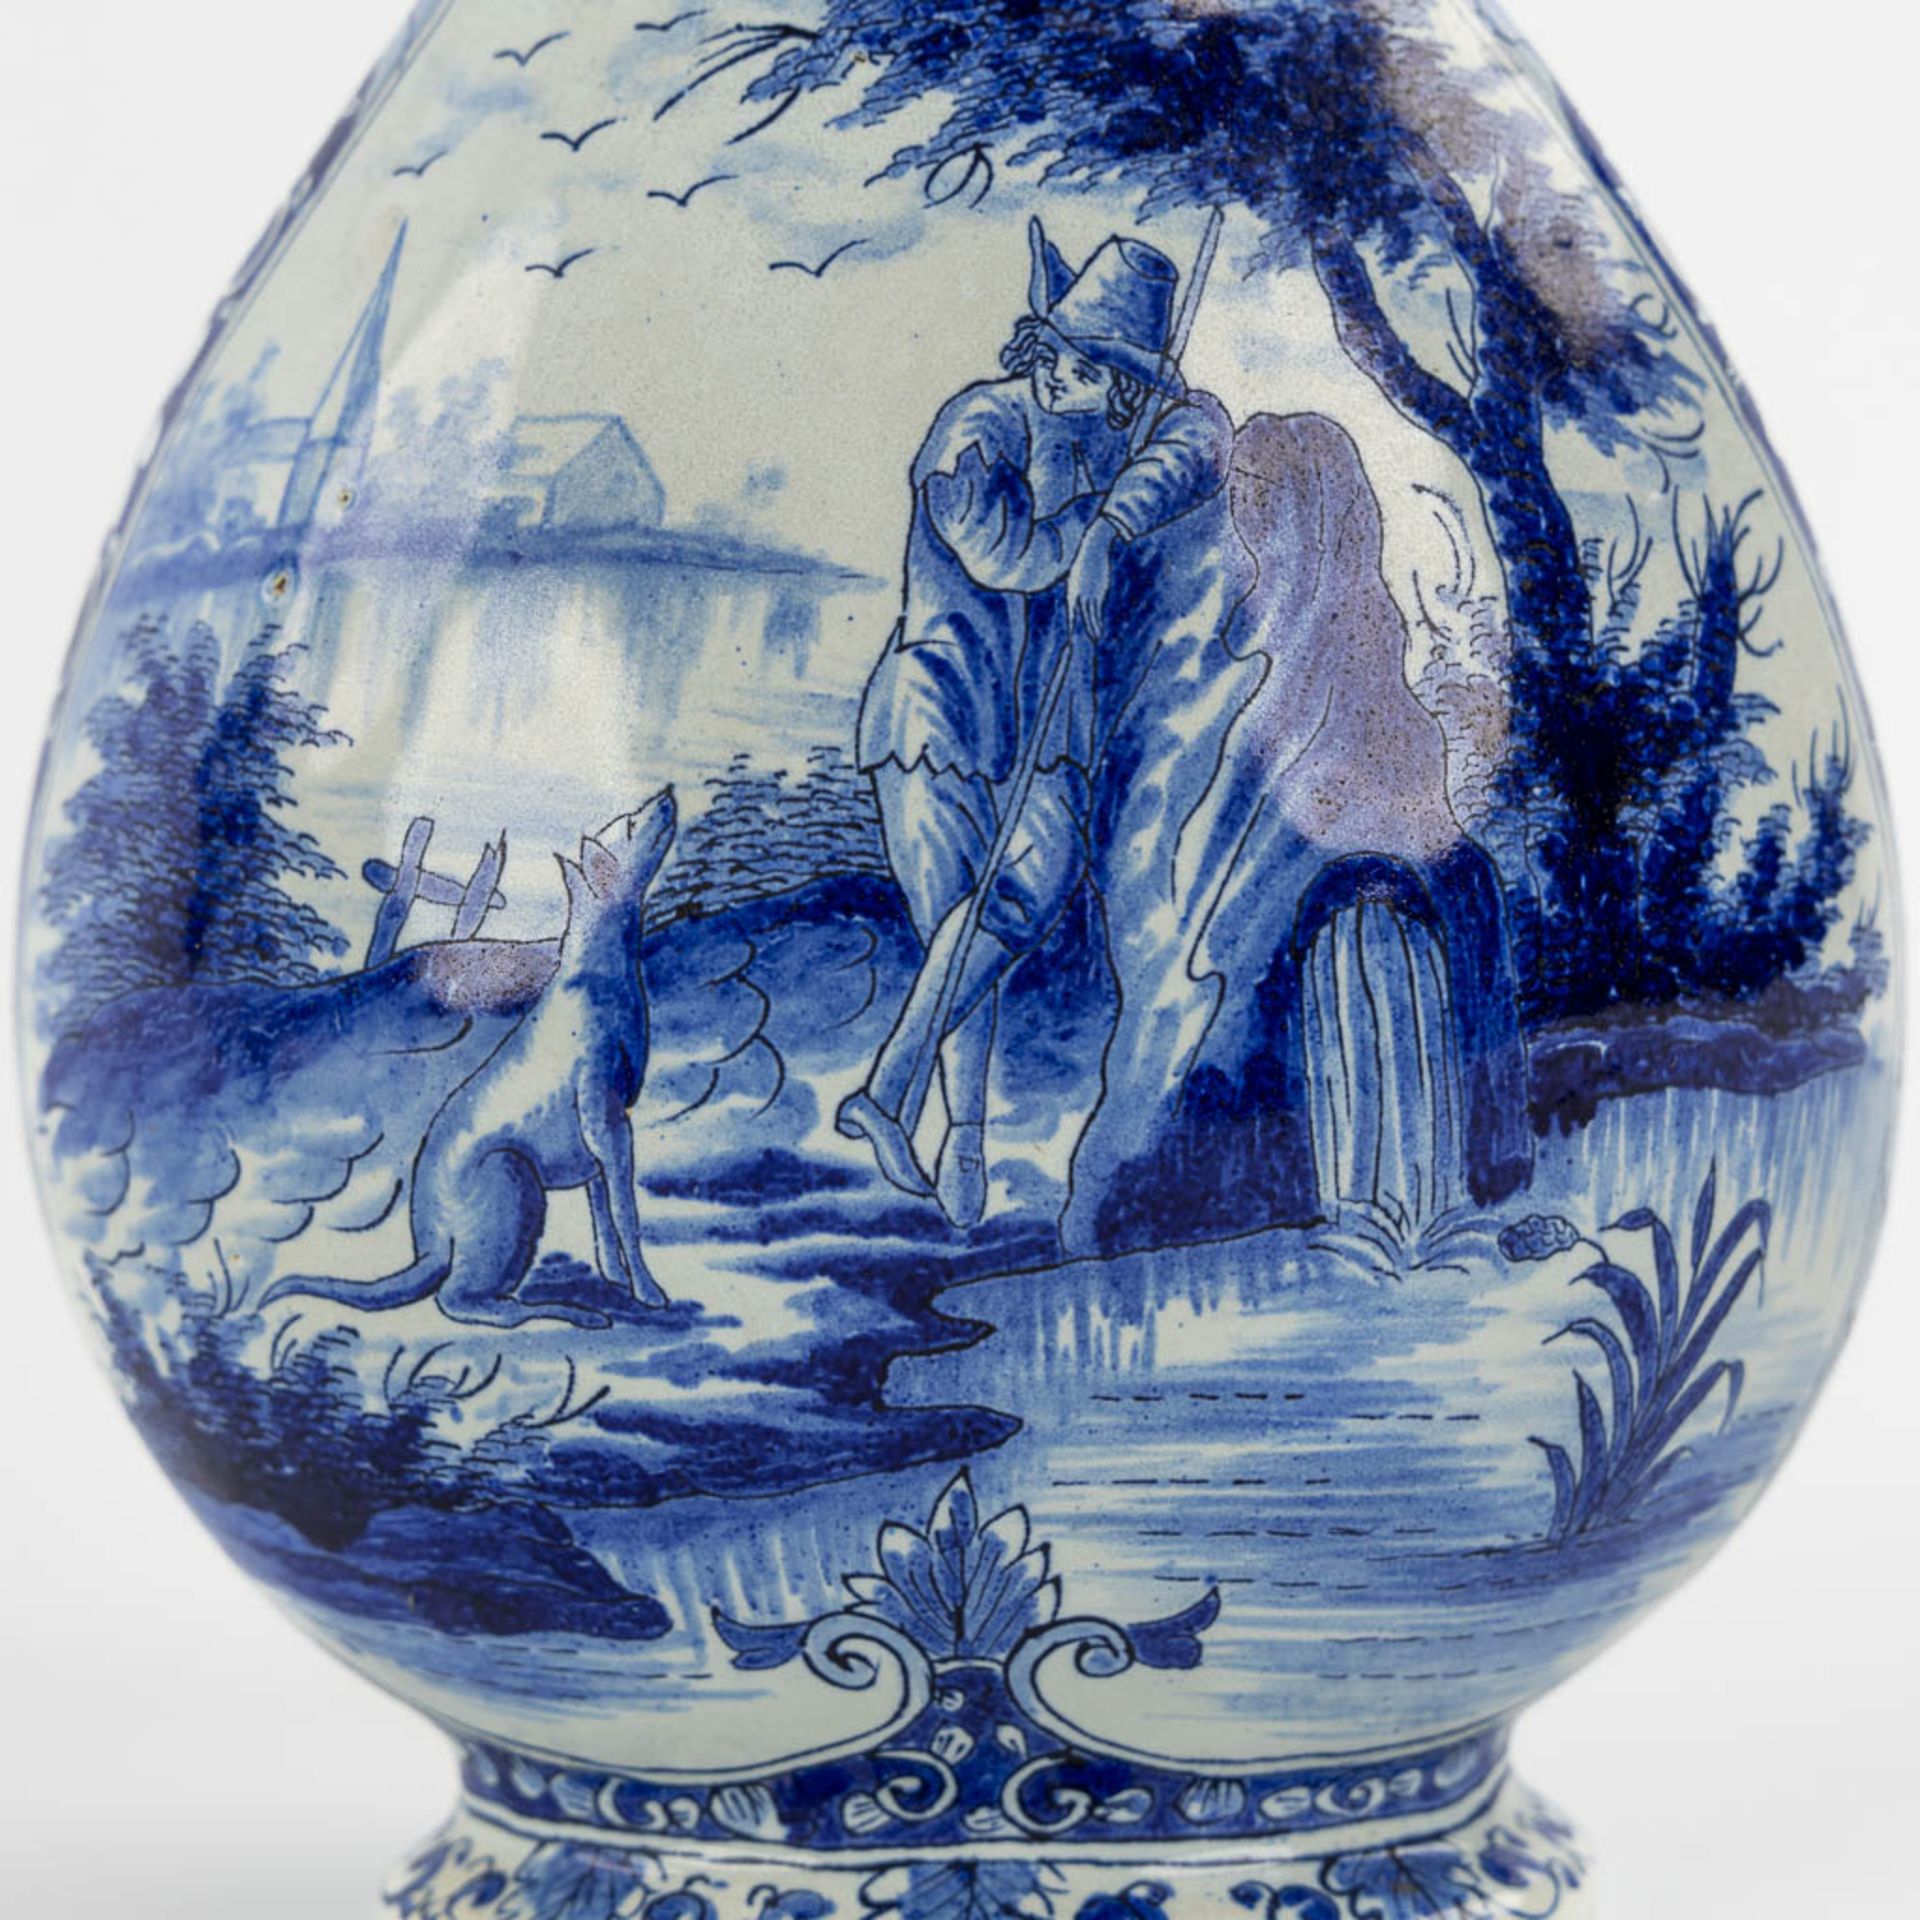 Geertrui Verstelle, Delft, a pair of vases with a landscape decor. Mid 18th C. (L:9 x W:14 x H:26,5 - Image 13 of 15